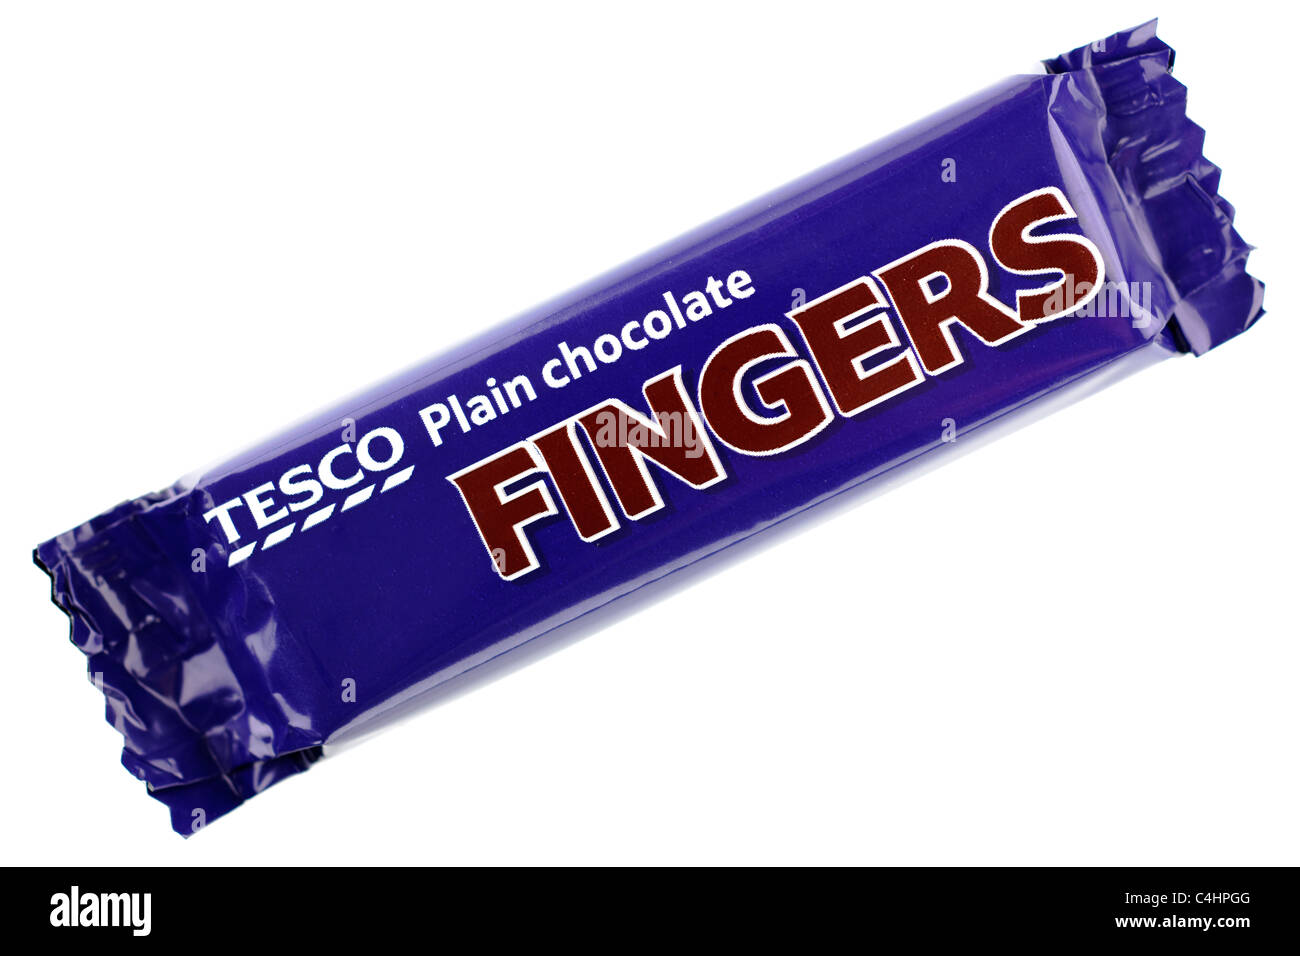 Wrapped Tesco plain chocolate two finger wafer bar Stock Photo